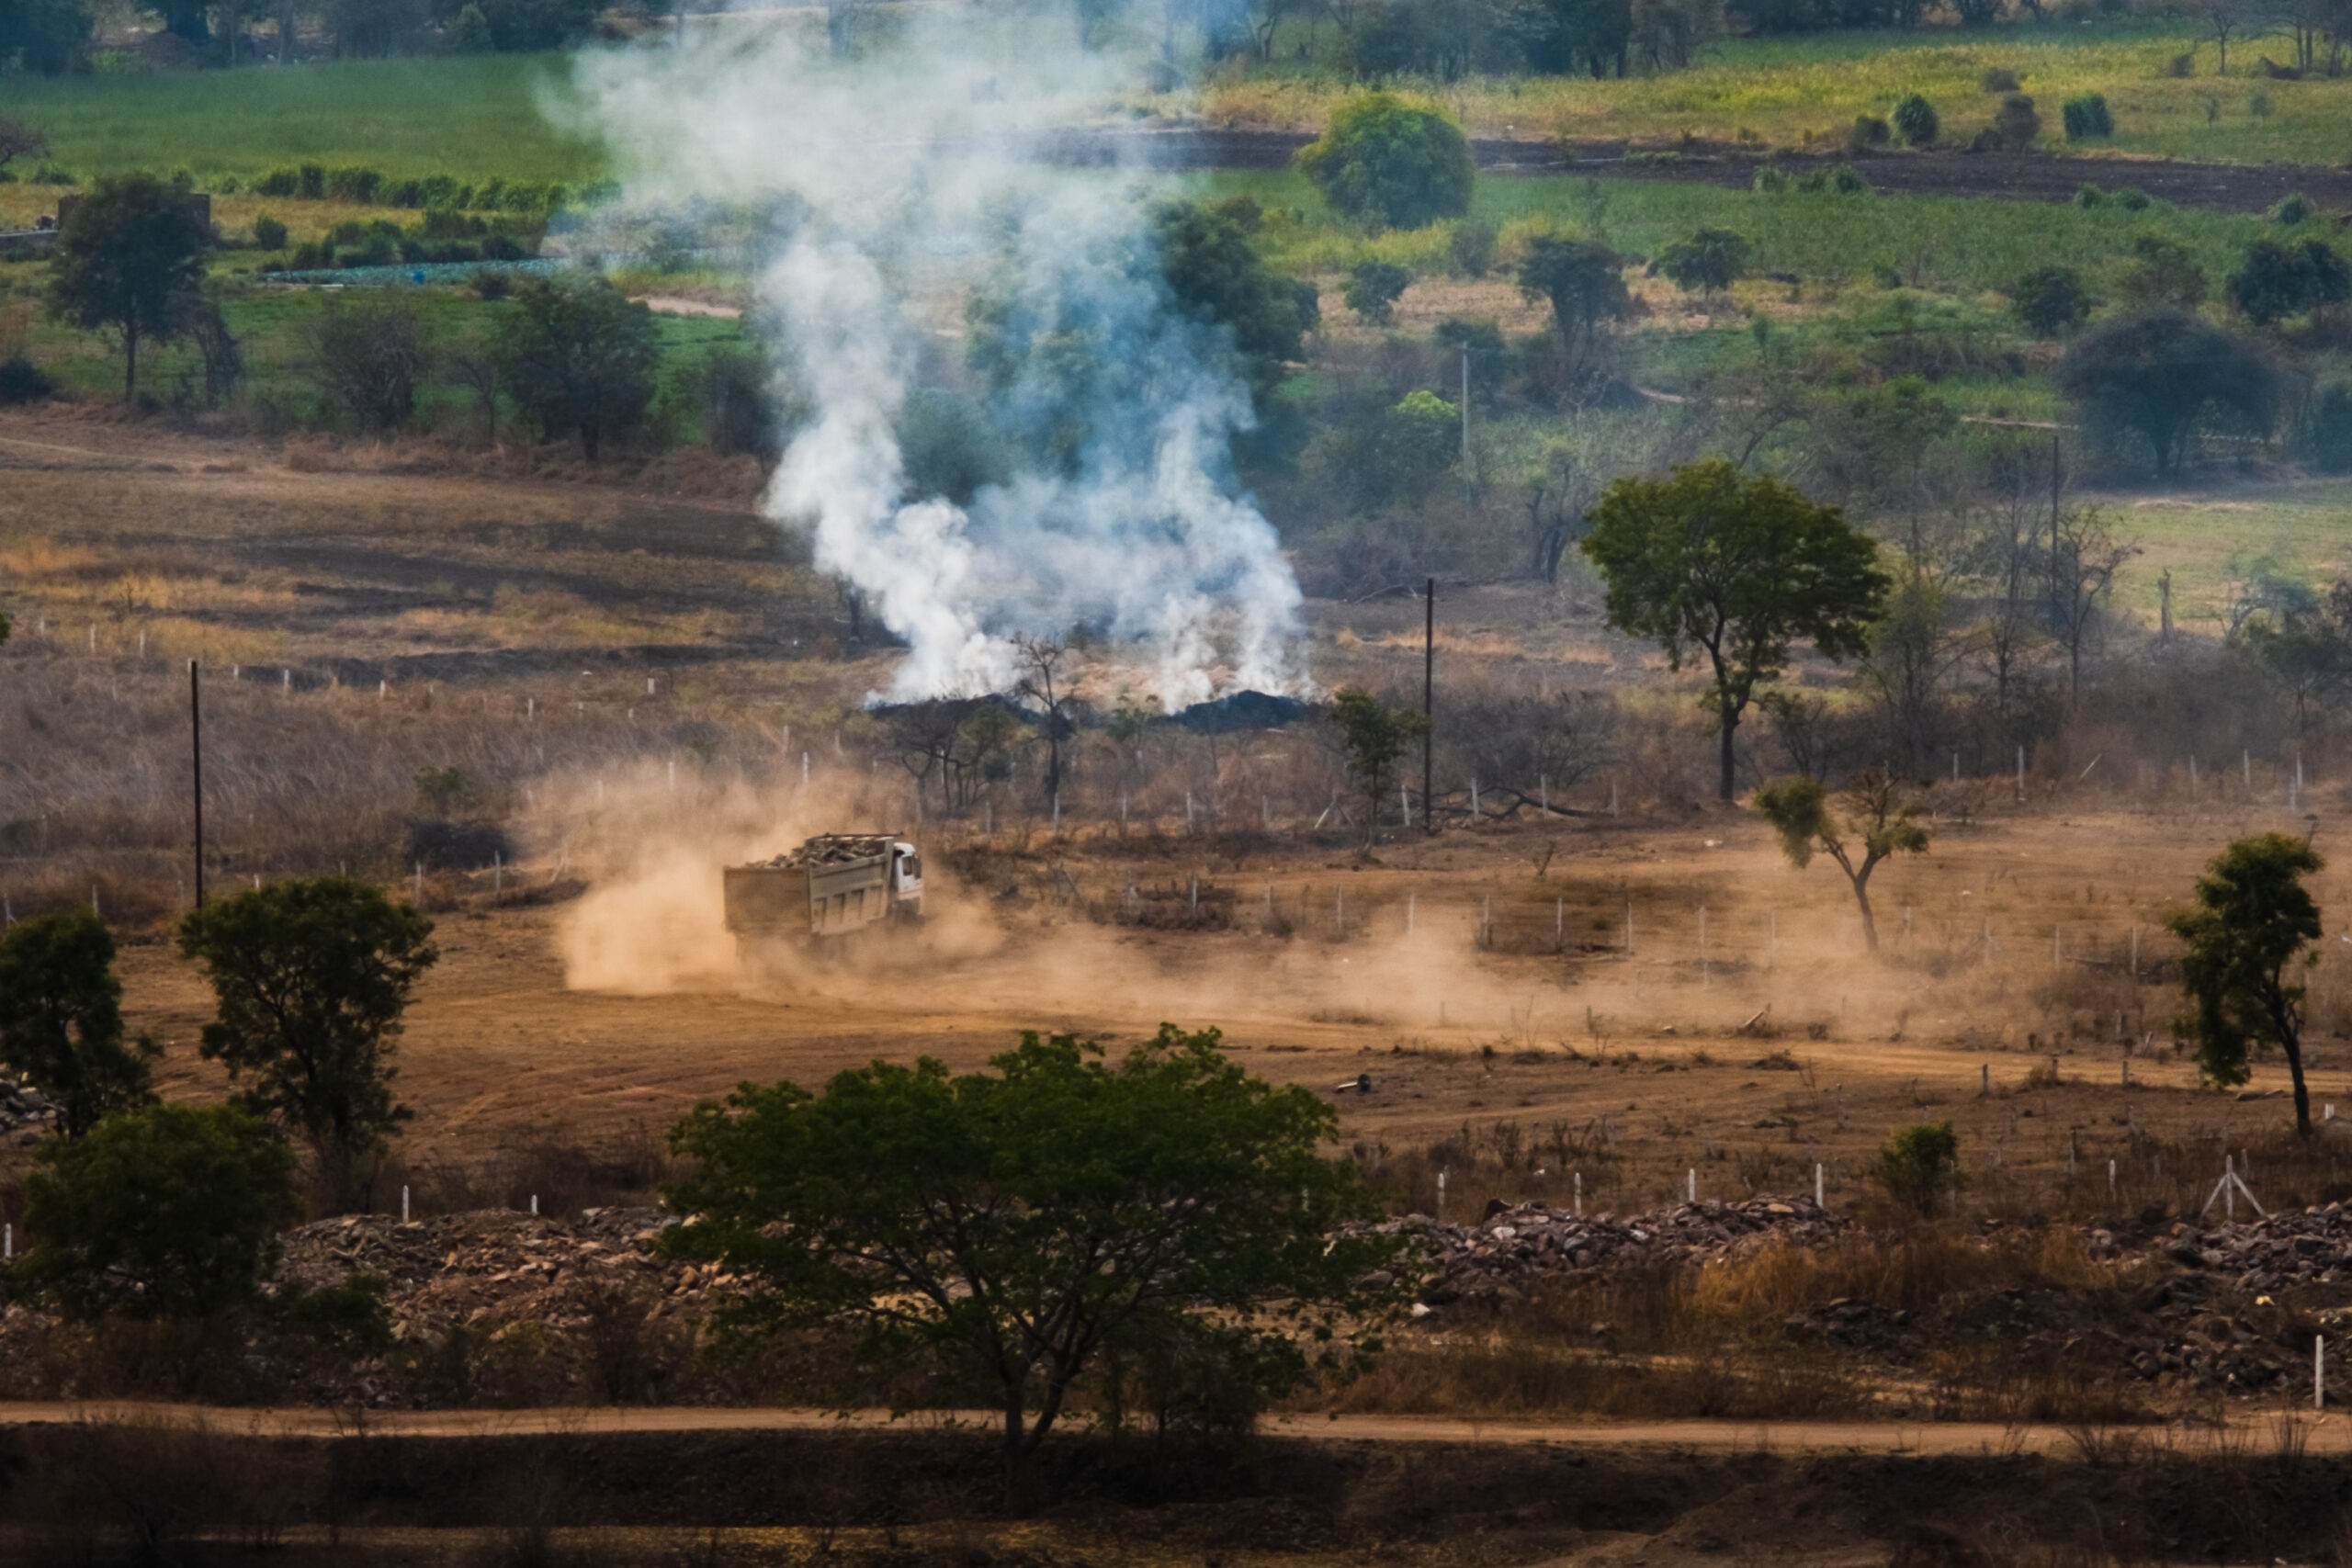 Read more about the article Constructing roads connected labour markets but increased harmful crop fires in rural India